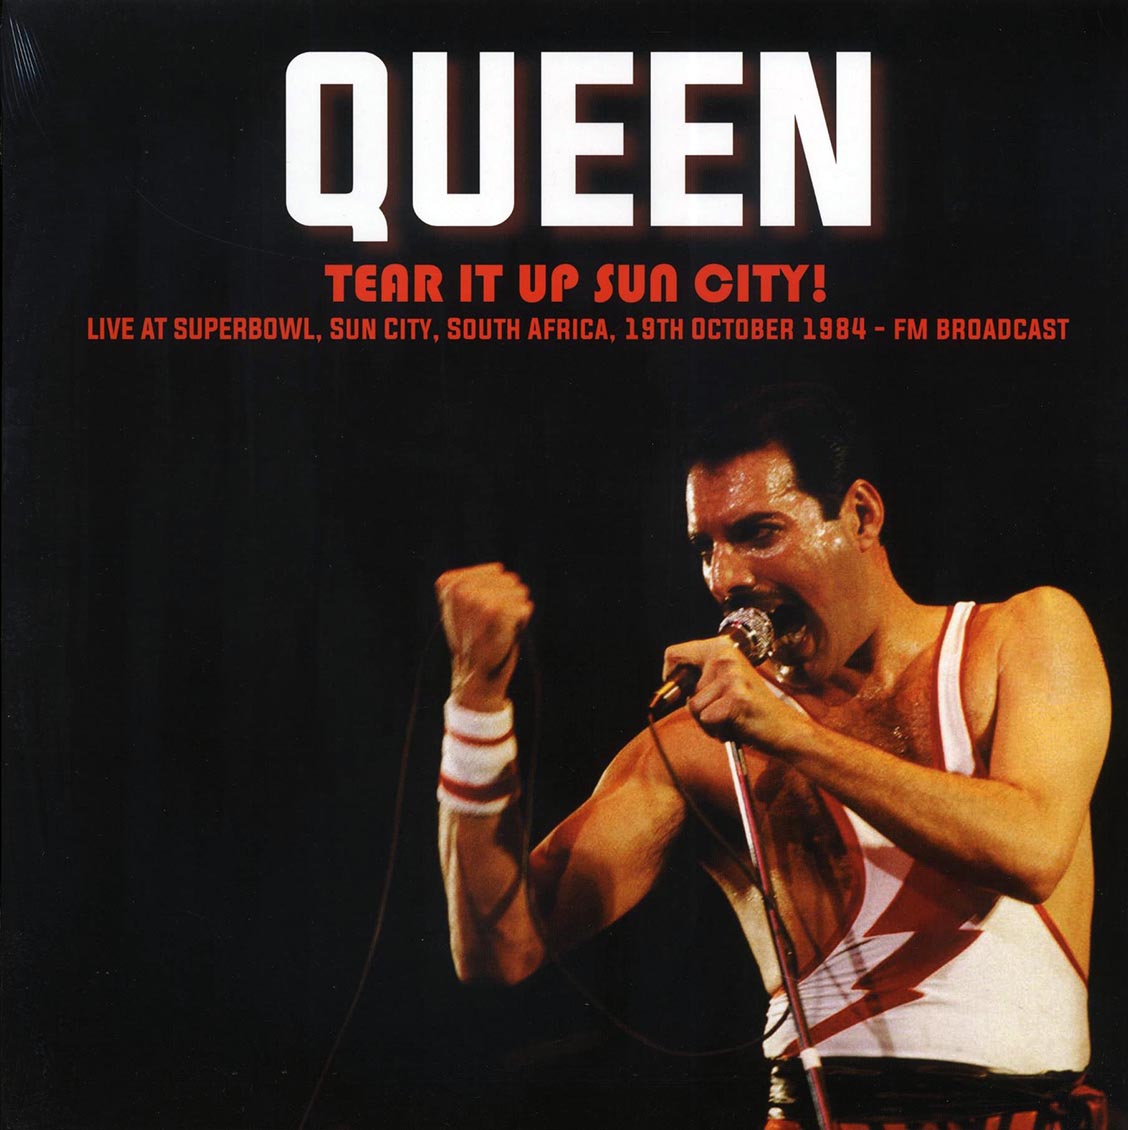 Queen - Tear It Up Sun City! Live At Superbowl, Sun City, South Africa, 19th October 1984 FM Broadcast (ltd. 500 copies made) - Vinyl LP